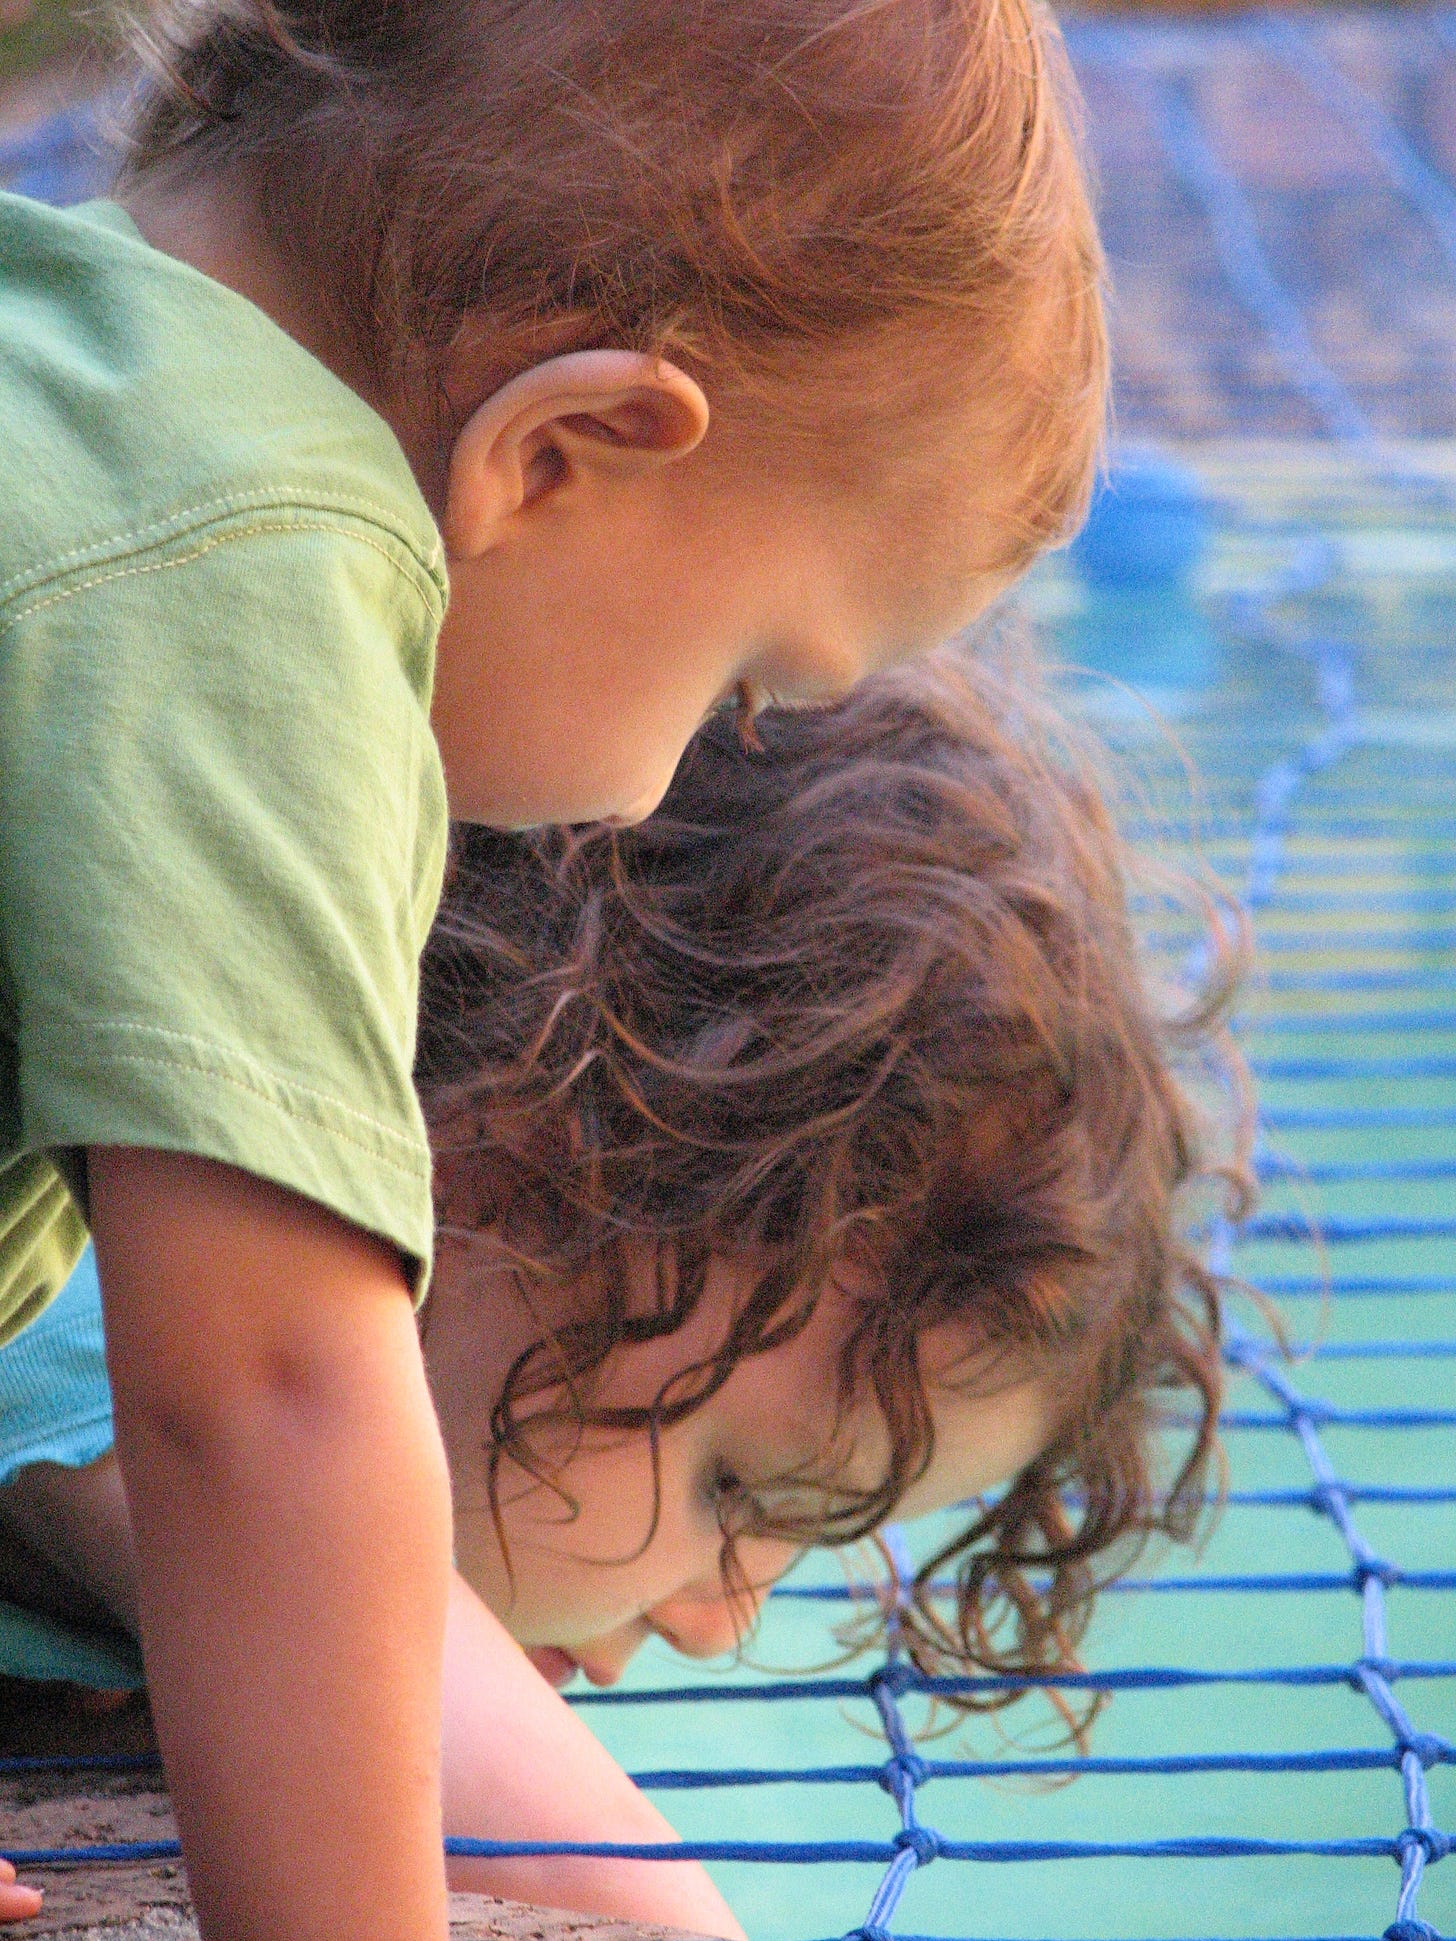 two young children peering into a pool with intent concentration